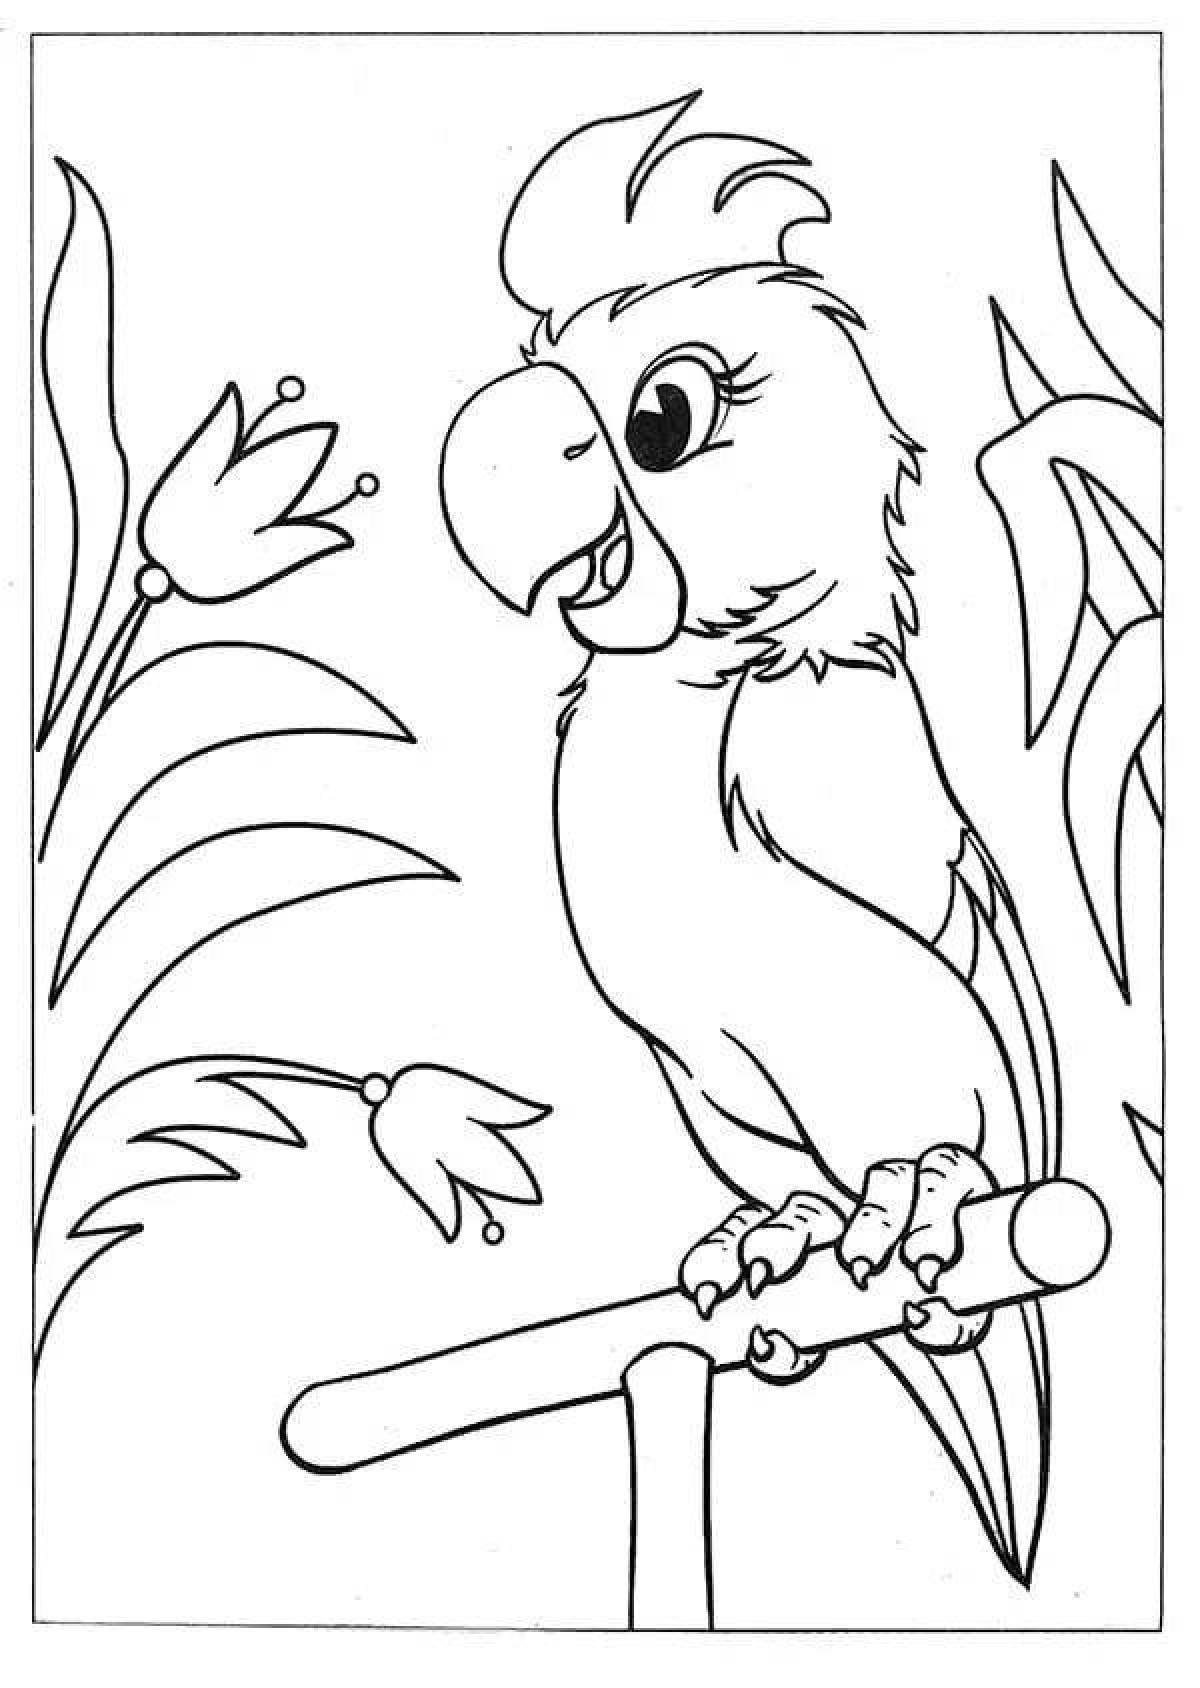 Coloring exotic parrot for kids